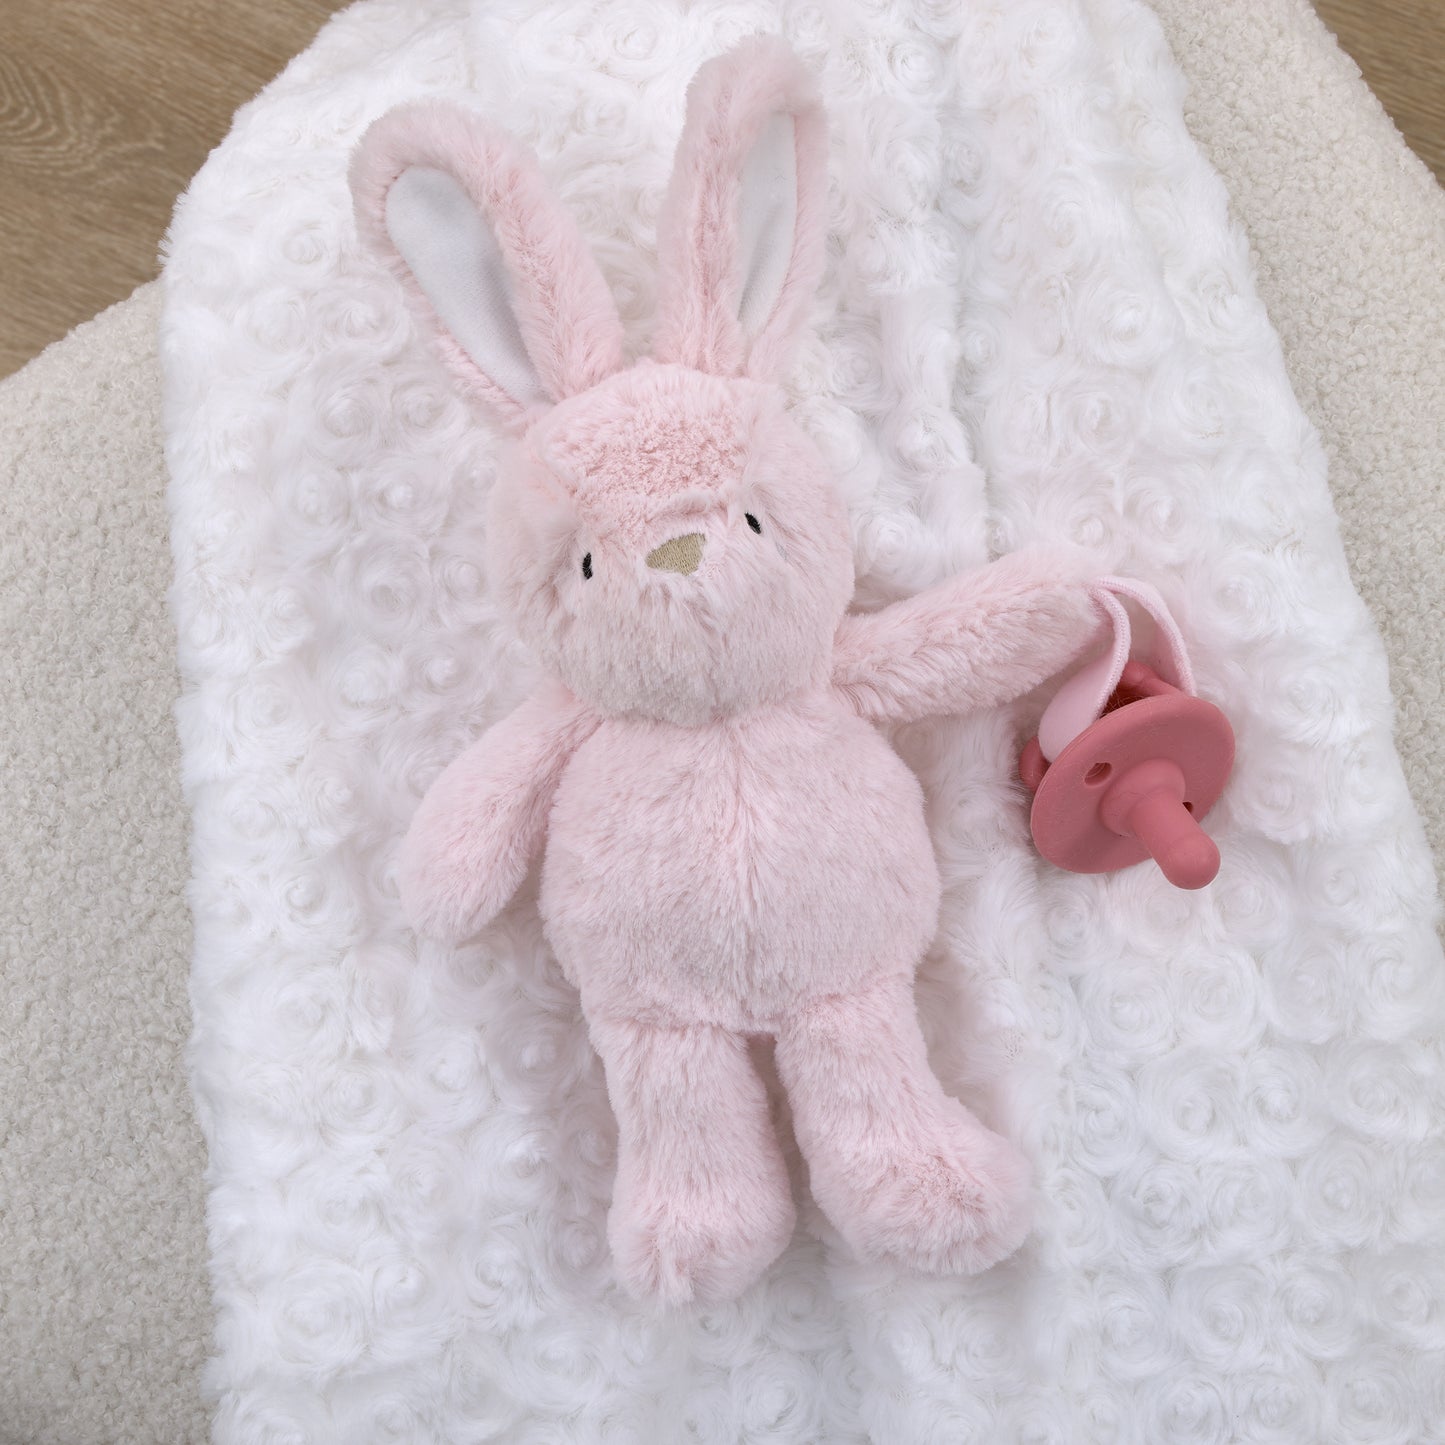 Little Love by NoJo Bunny Shaped Pink and White Plush Pacifier Buddy